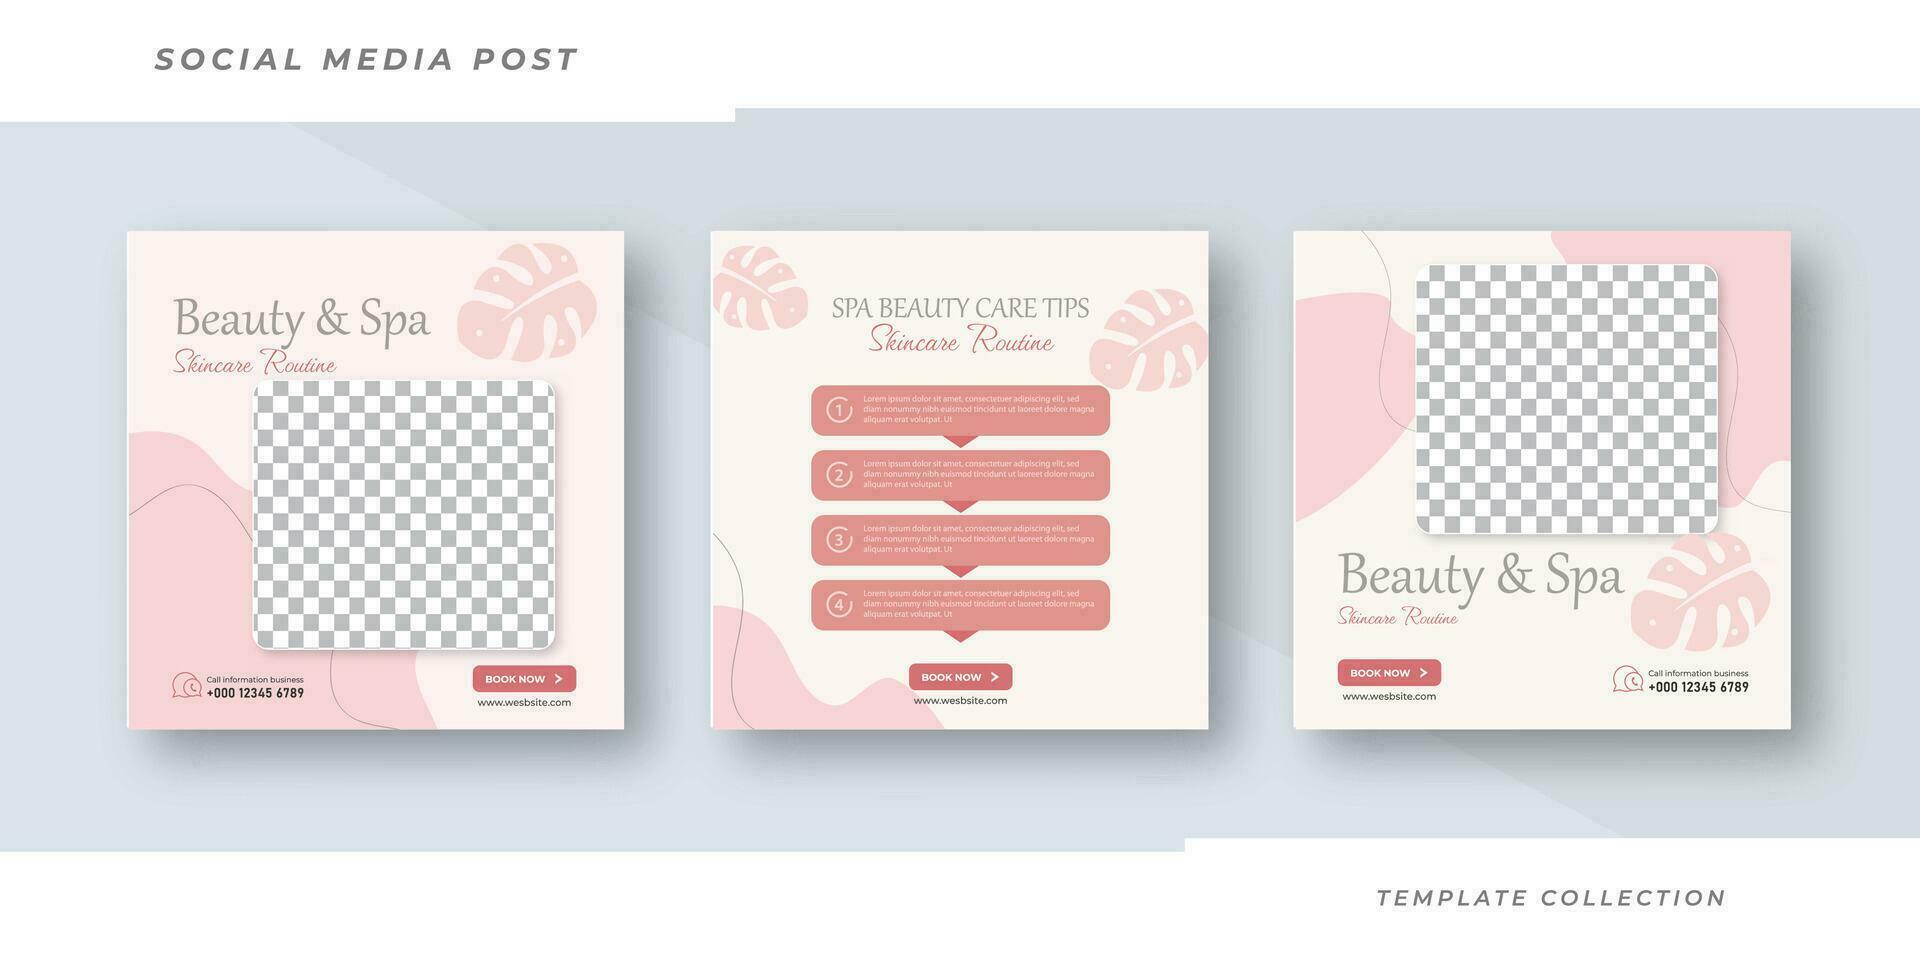 Beauty and spa skincare Makeup Social media post Banner Square Flyer Template Design vector